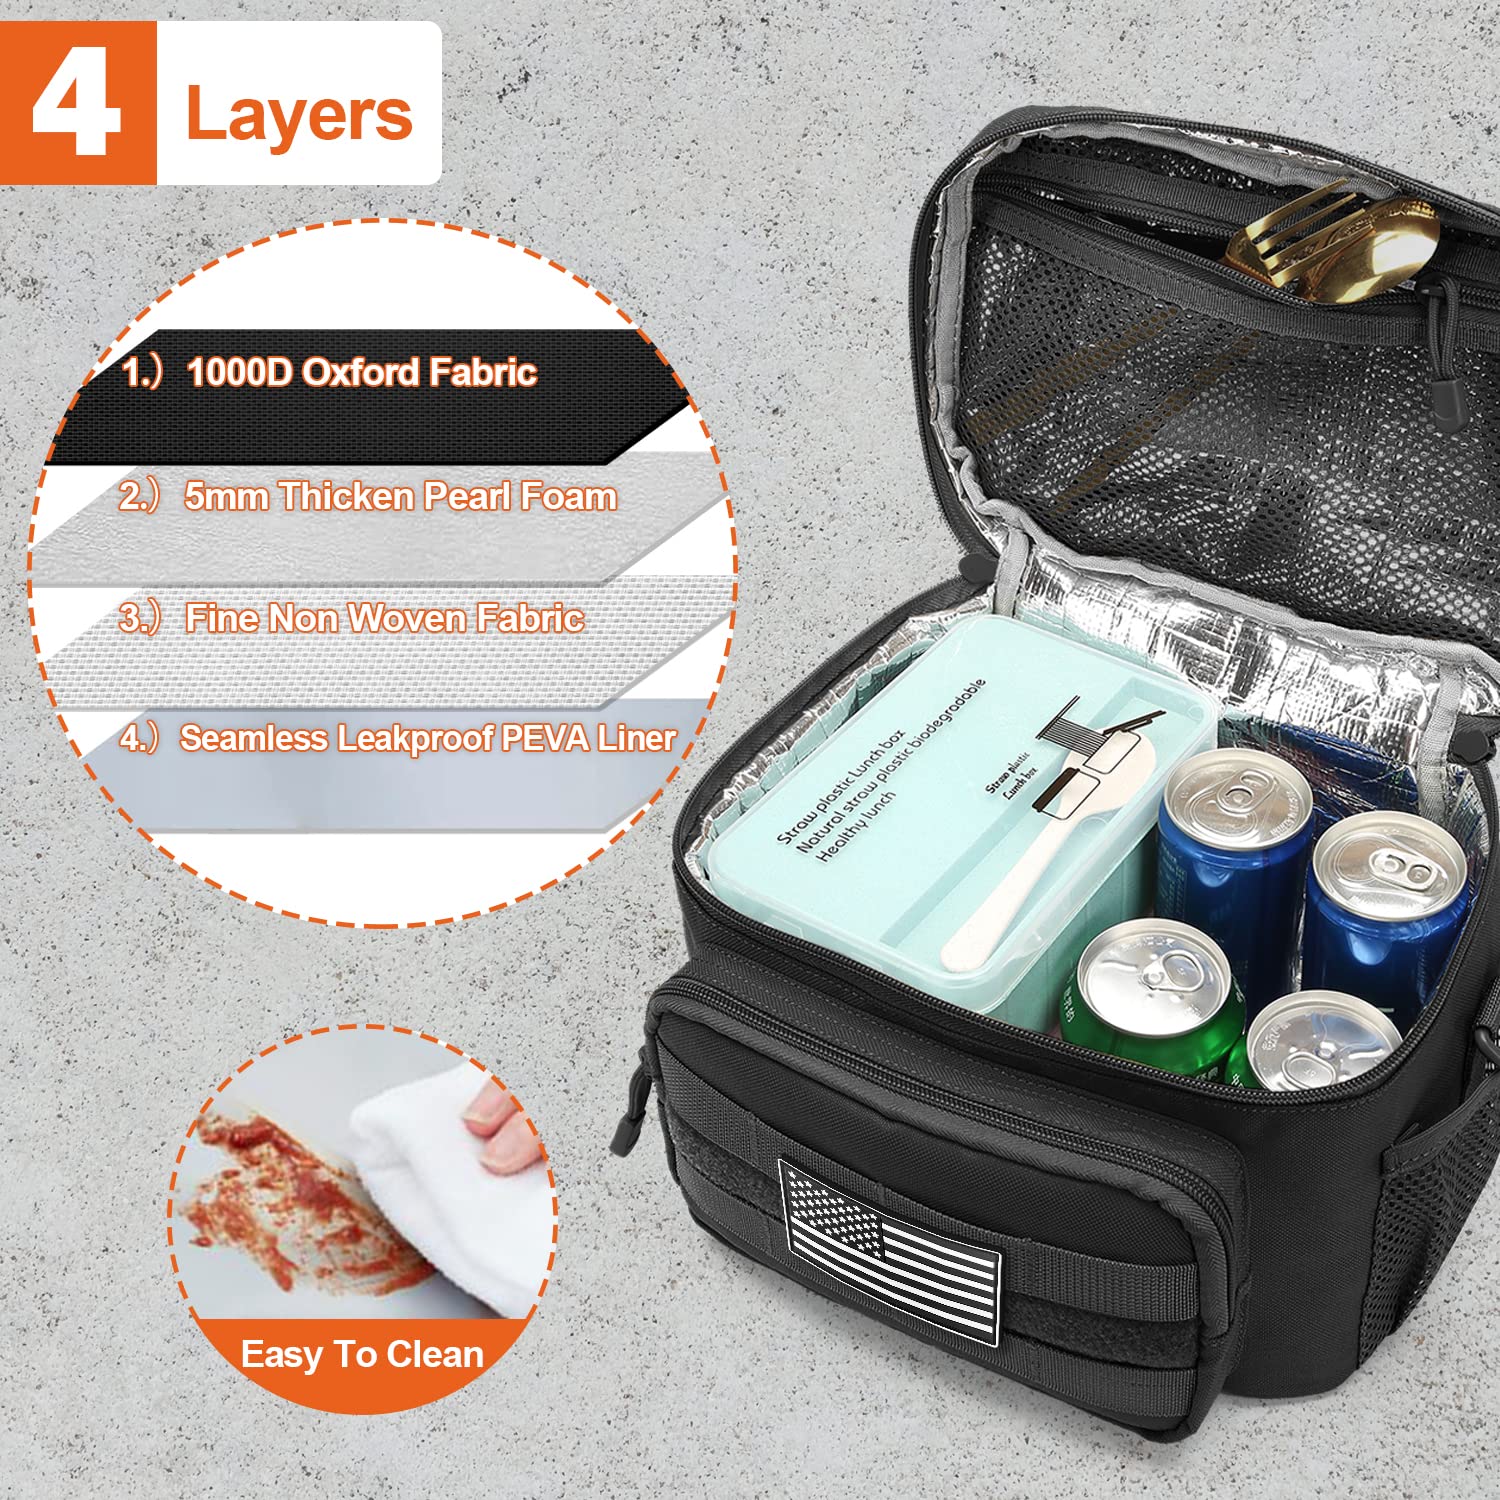 POWNEW Tactical Lunch Box for Men Women, Large Insulated Cooler Bag Lunch Pail for Office Work Picnic Gym Construction Camping, Gifts for Christmas Birthday